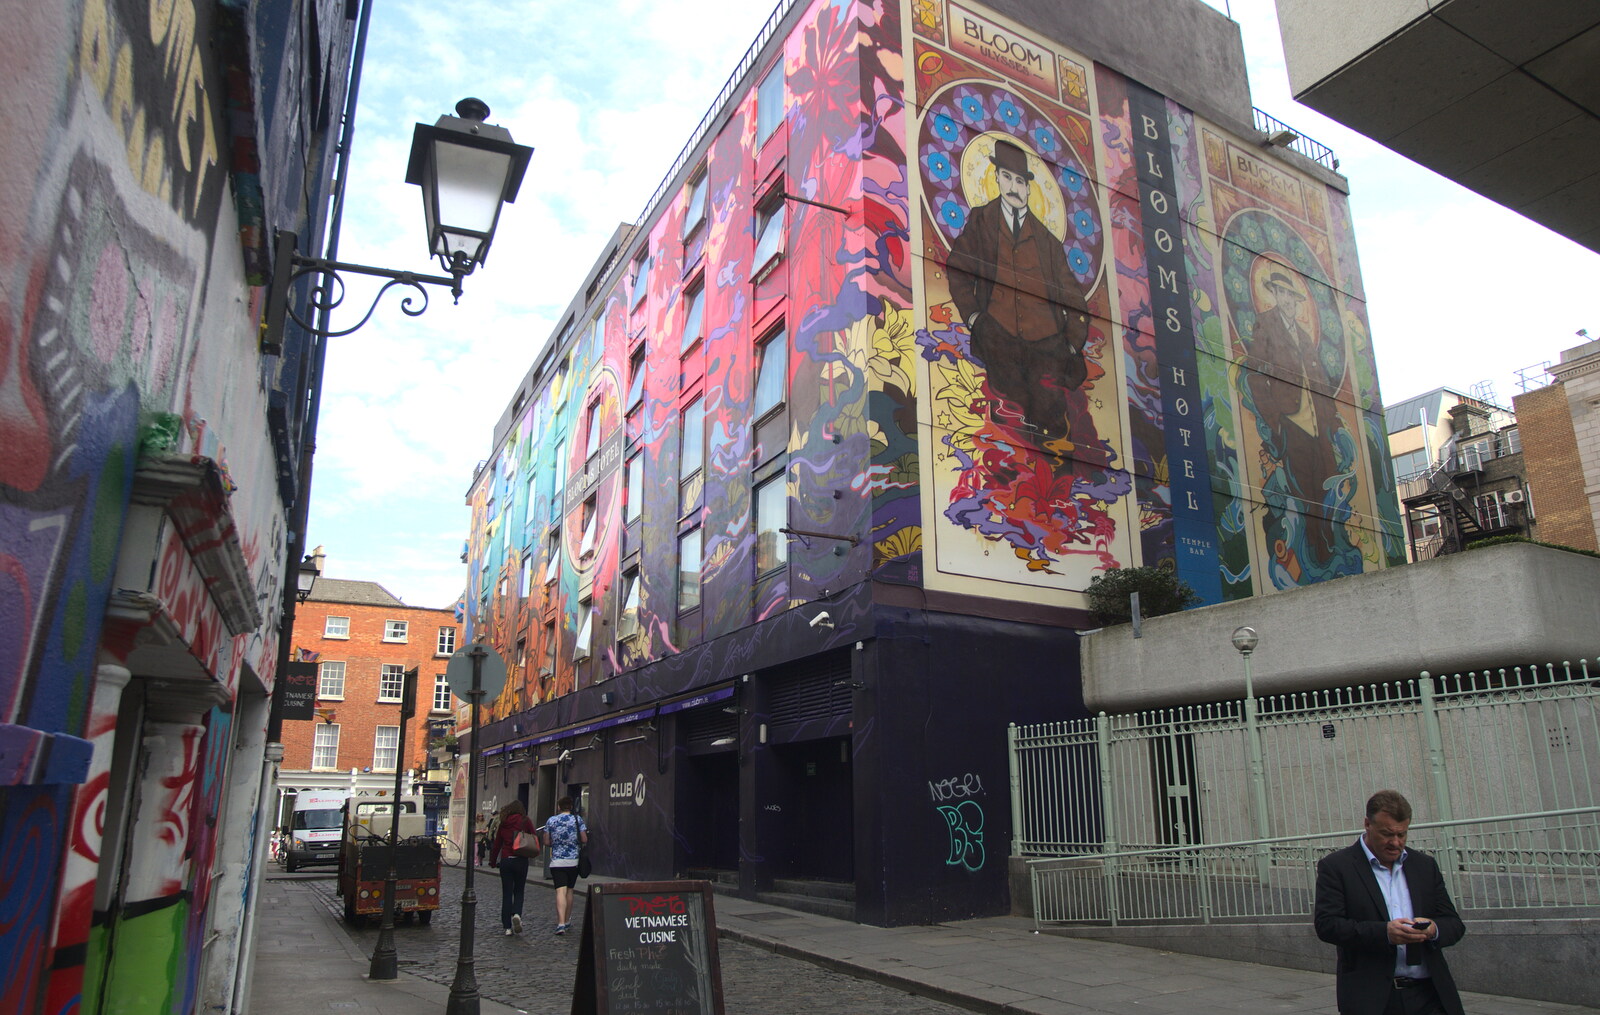 The funky Blooms Hotel in Temple Bar from Temple Bar and Dun Laoghaire, Dublin, Ireland - 16th April 2015